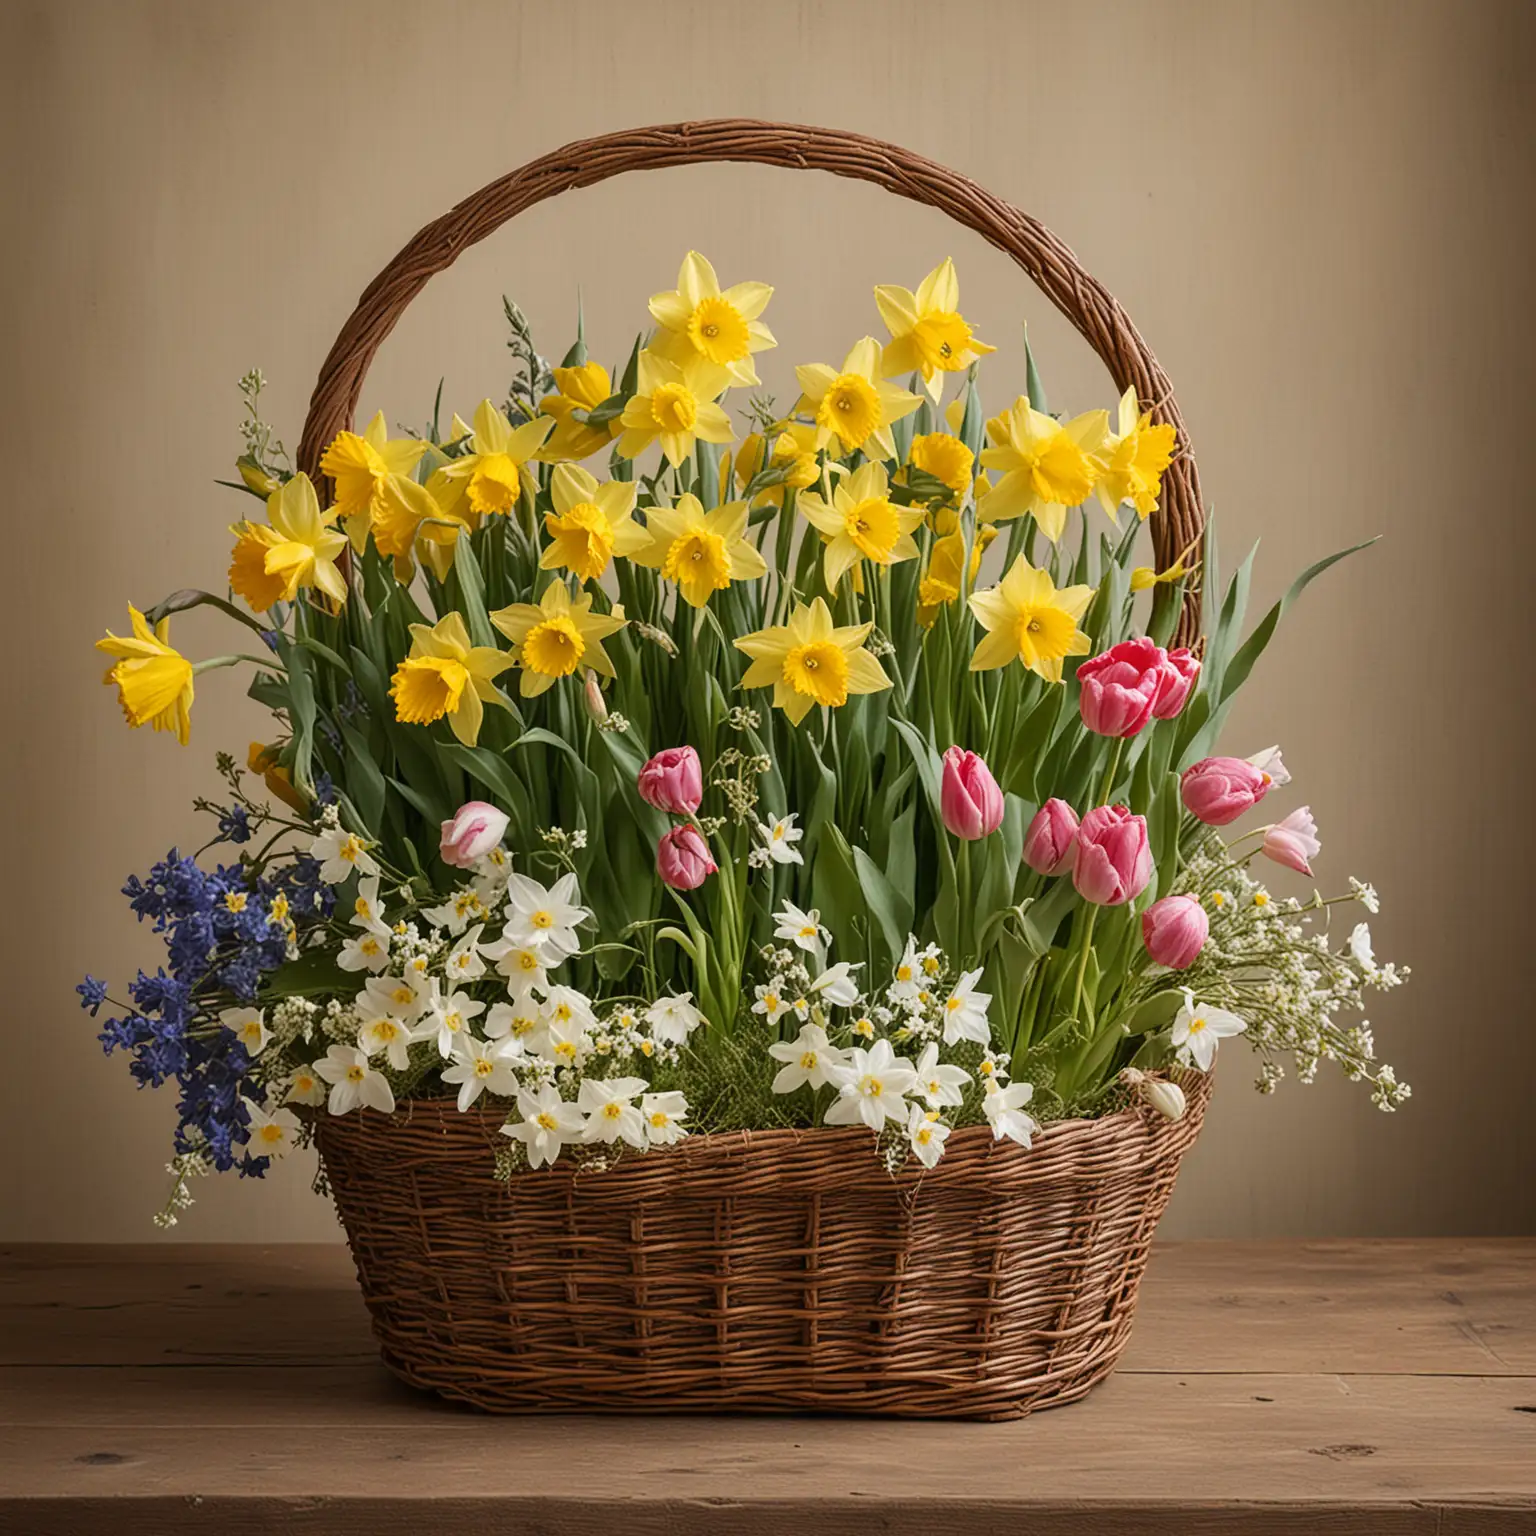 Daffodils, tulips and wild flowers displayed in a wicker basket. Background color to be light cream.